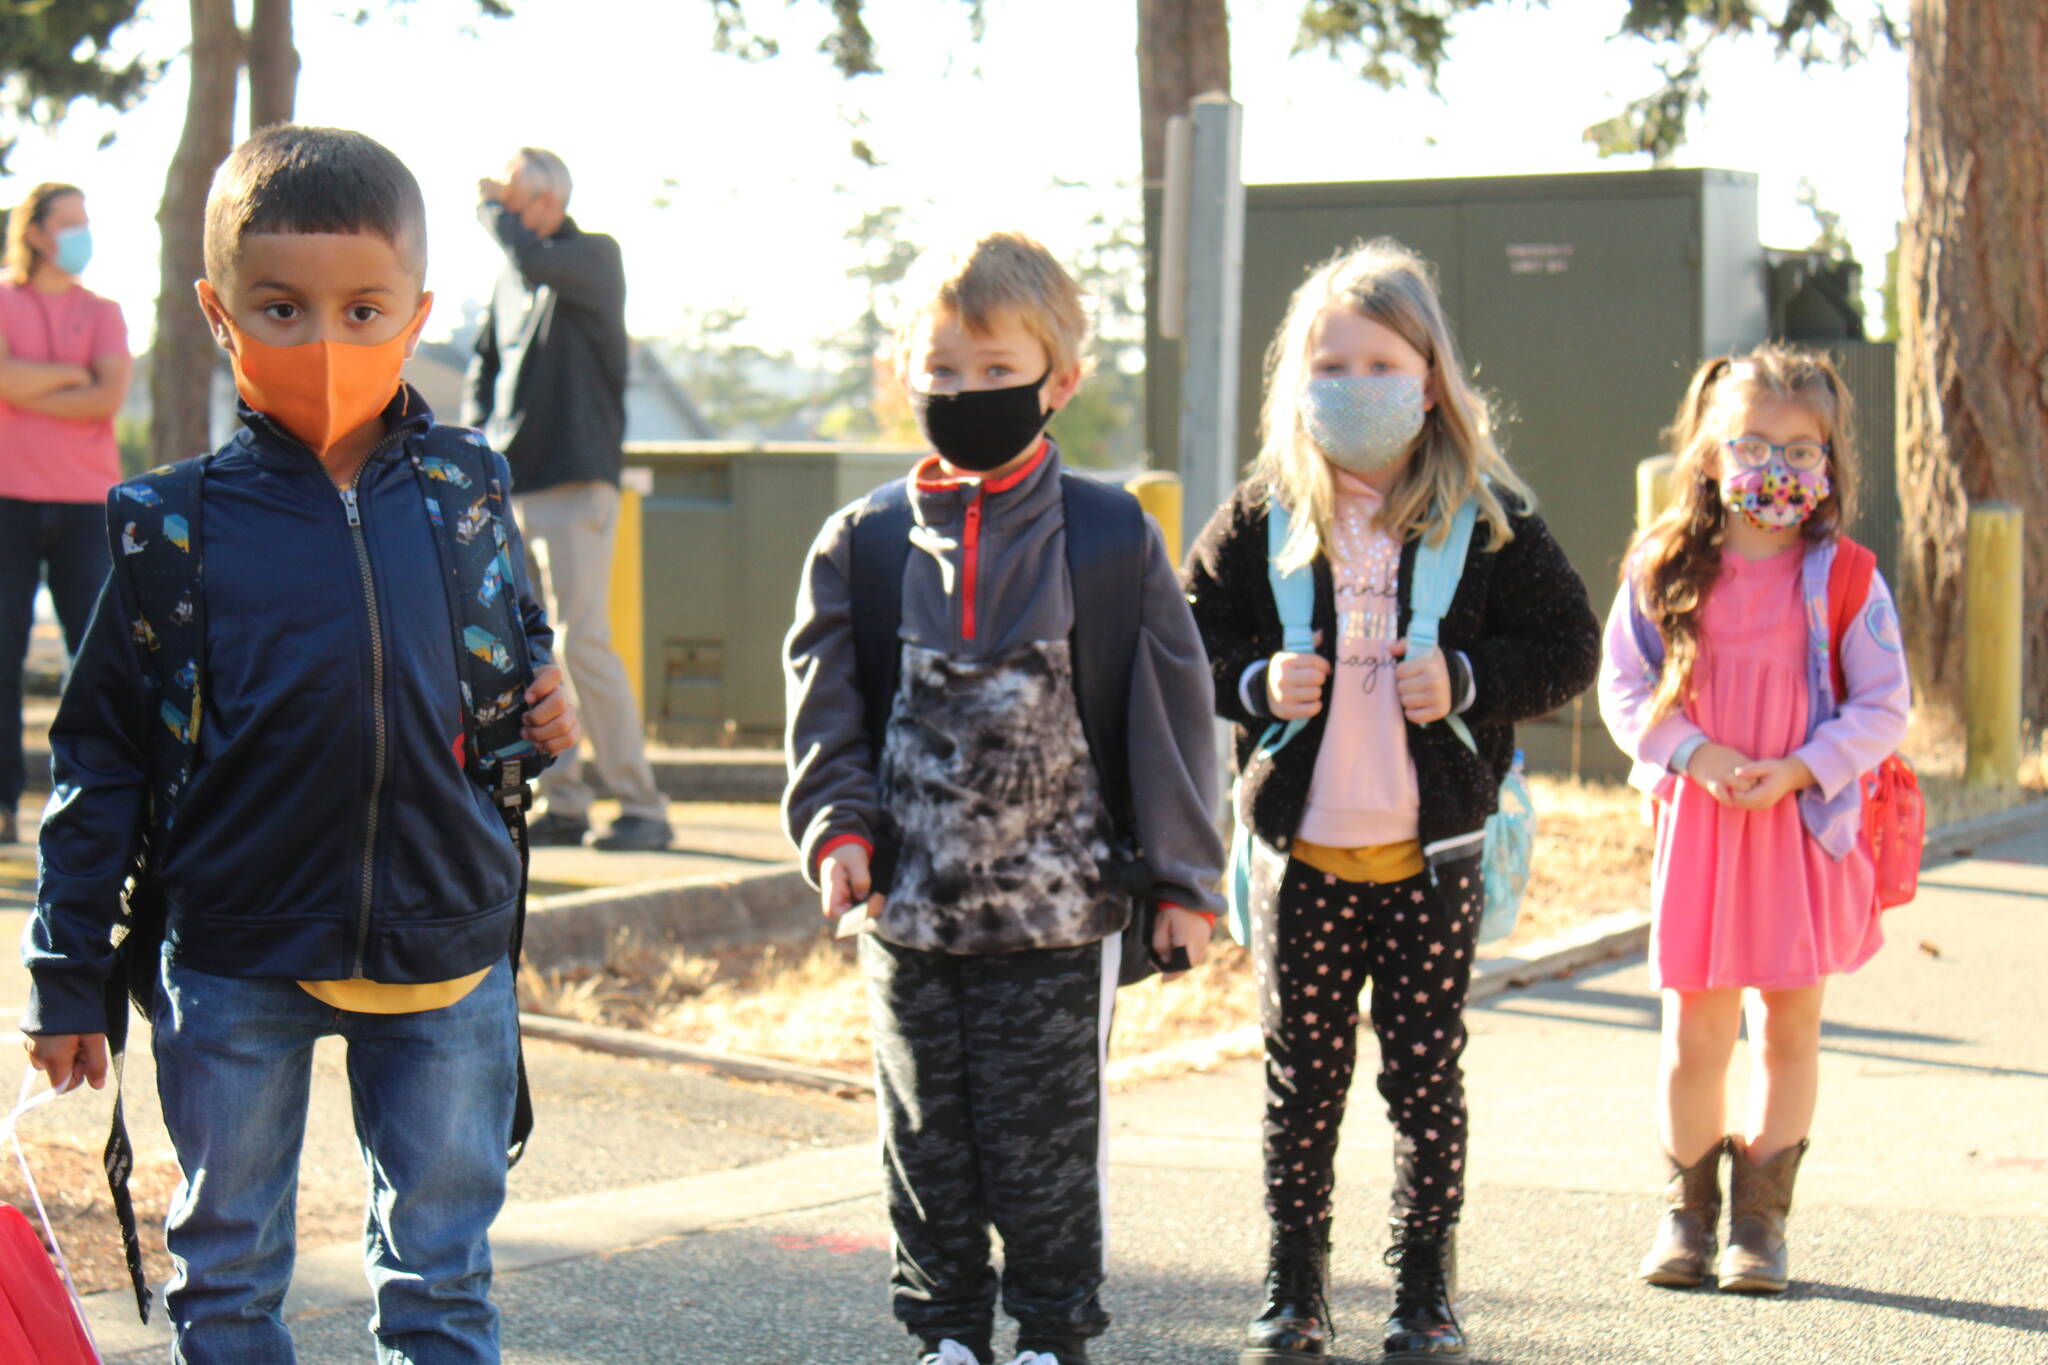 From left, Leo Hernandez-Gomez, Rex Burley, Adelaide Burley and Valerie Trevino wait in line to enter the school and find their new classrooms. (Photo by Karina Andrew/Whidbey News-Times)